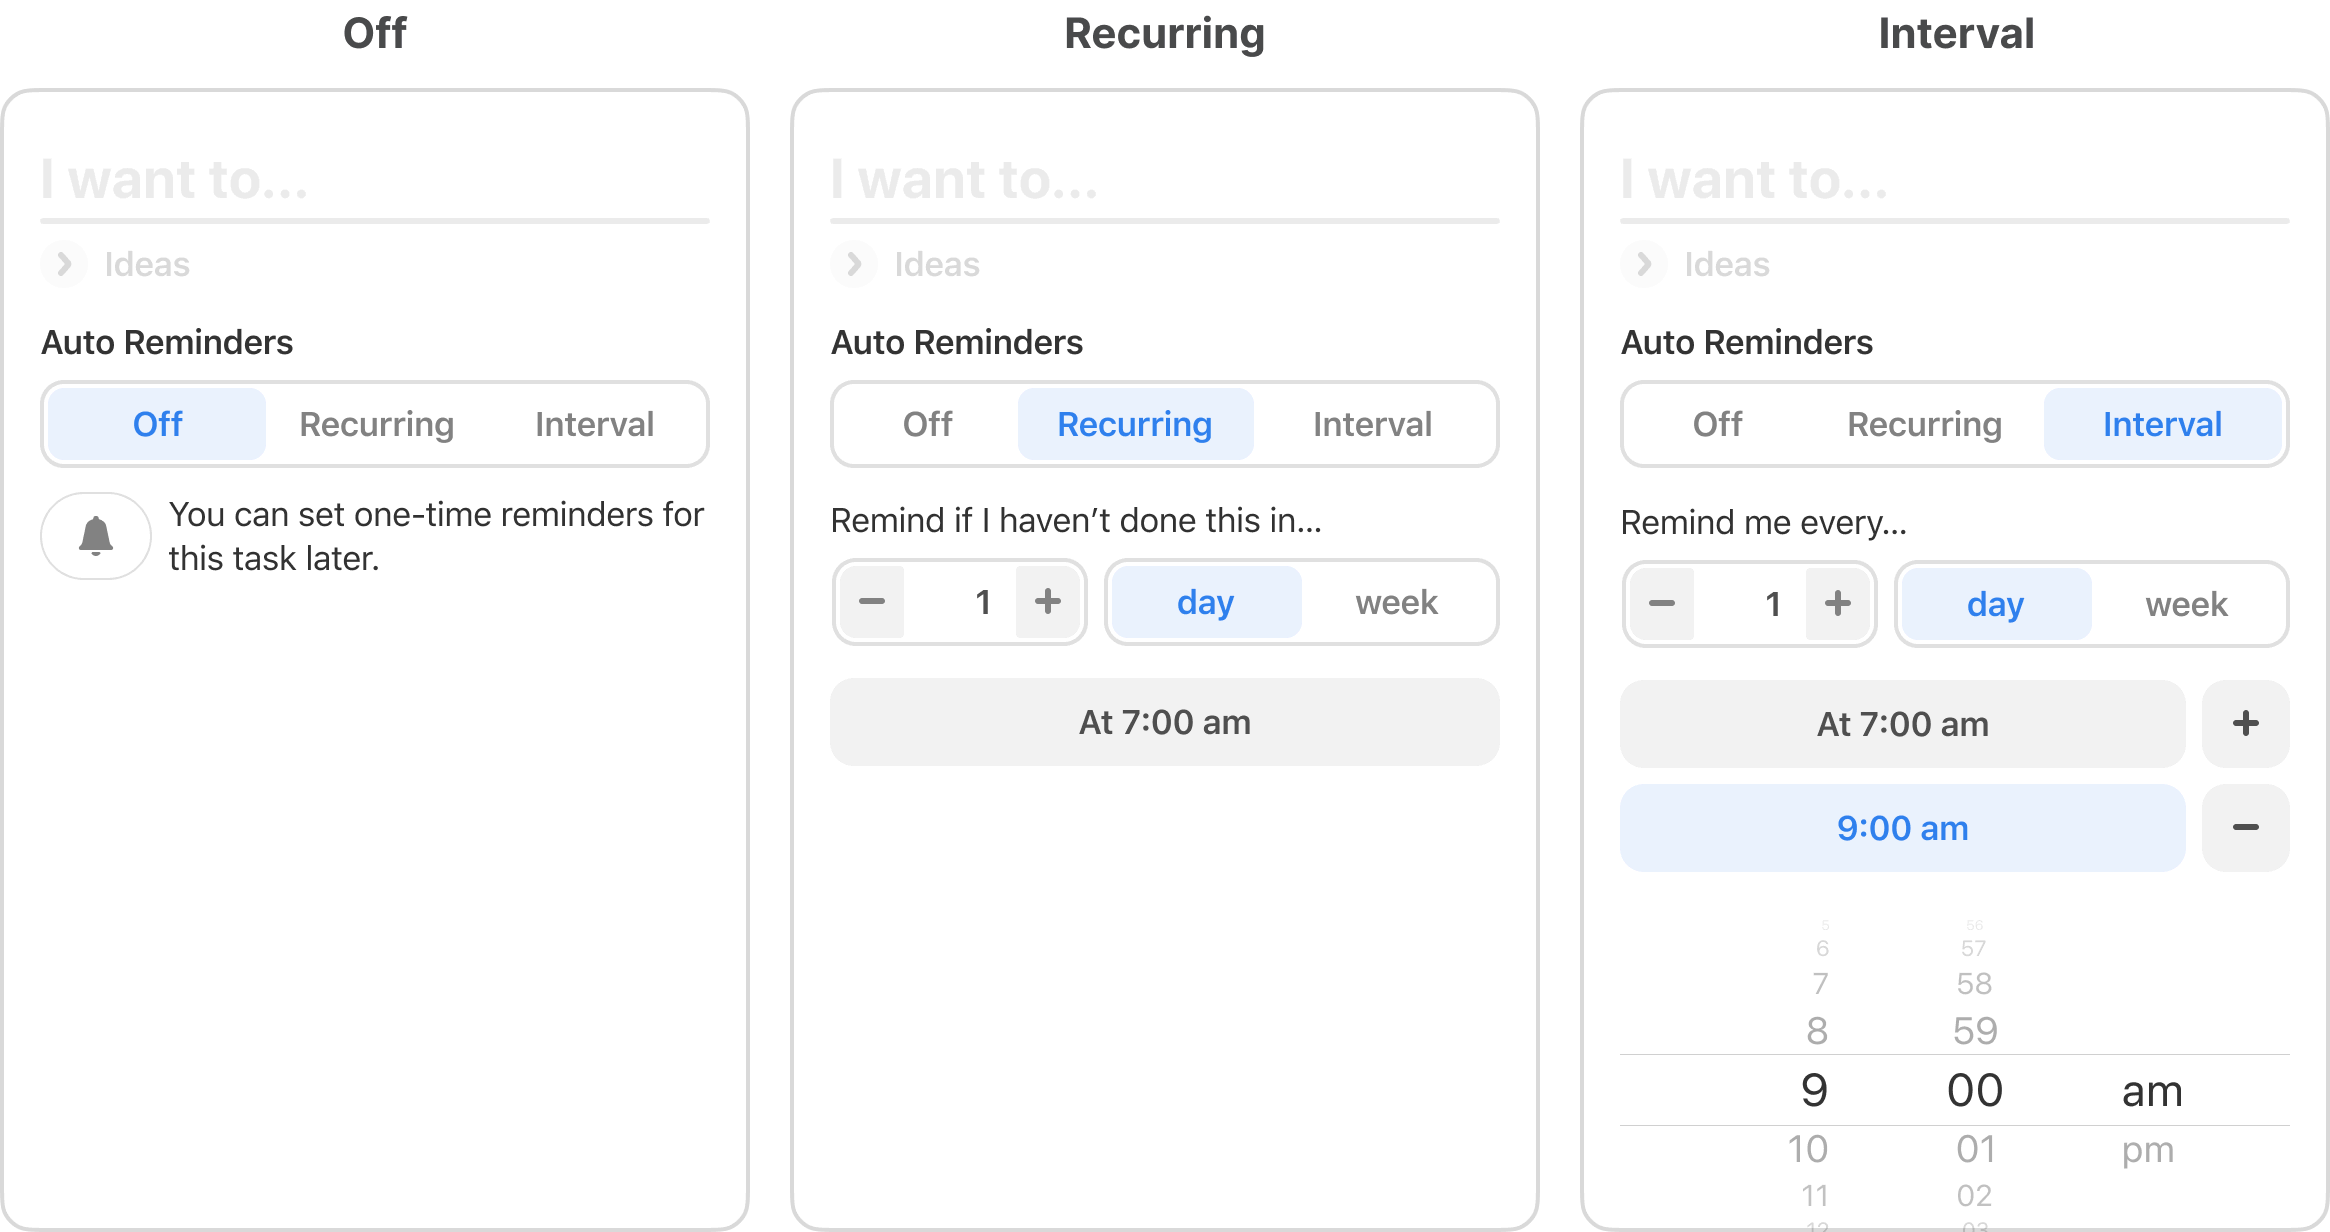 3 states of the auto reminders settings with the captions: off, recurring, and interval